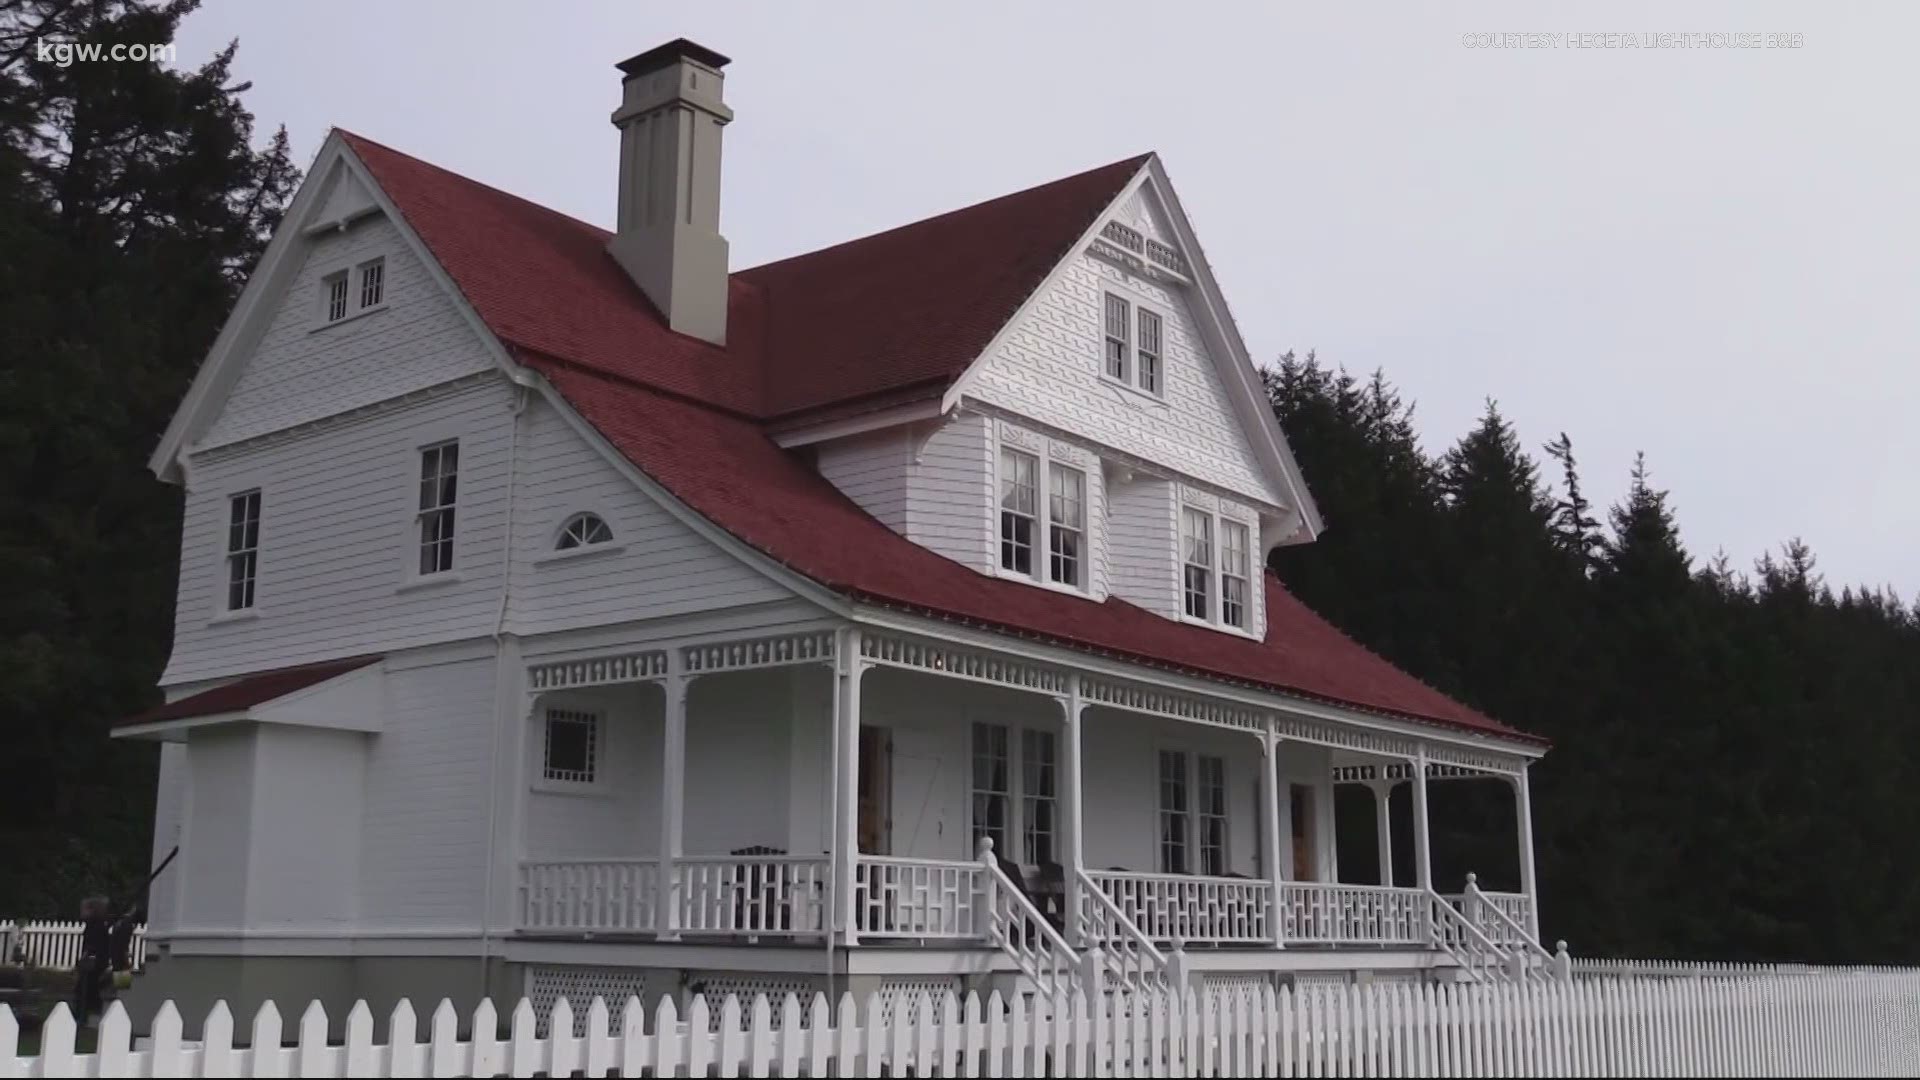 The bed and breakfast next to the iconic Heceta Head lighthouse has turned 25 years old, but the operators are struggling instead of celebrating.